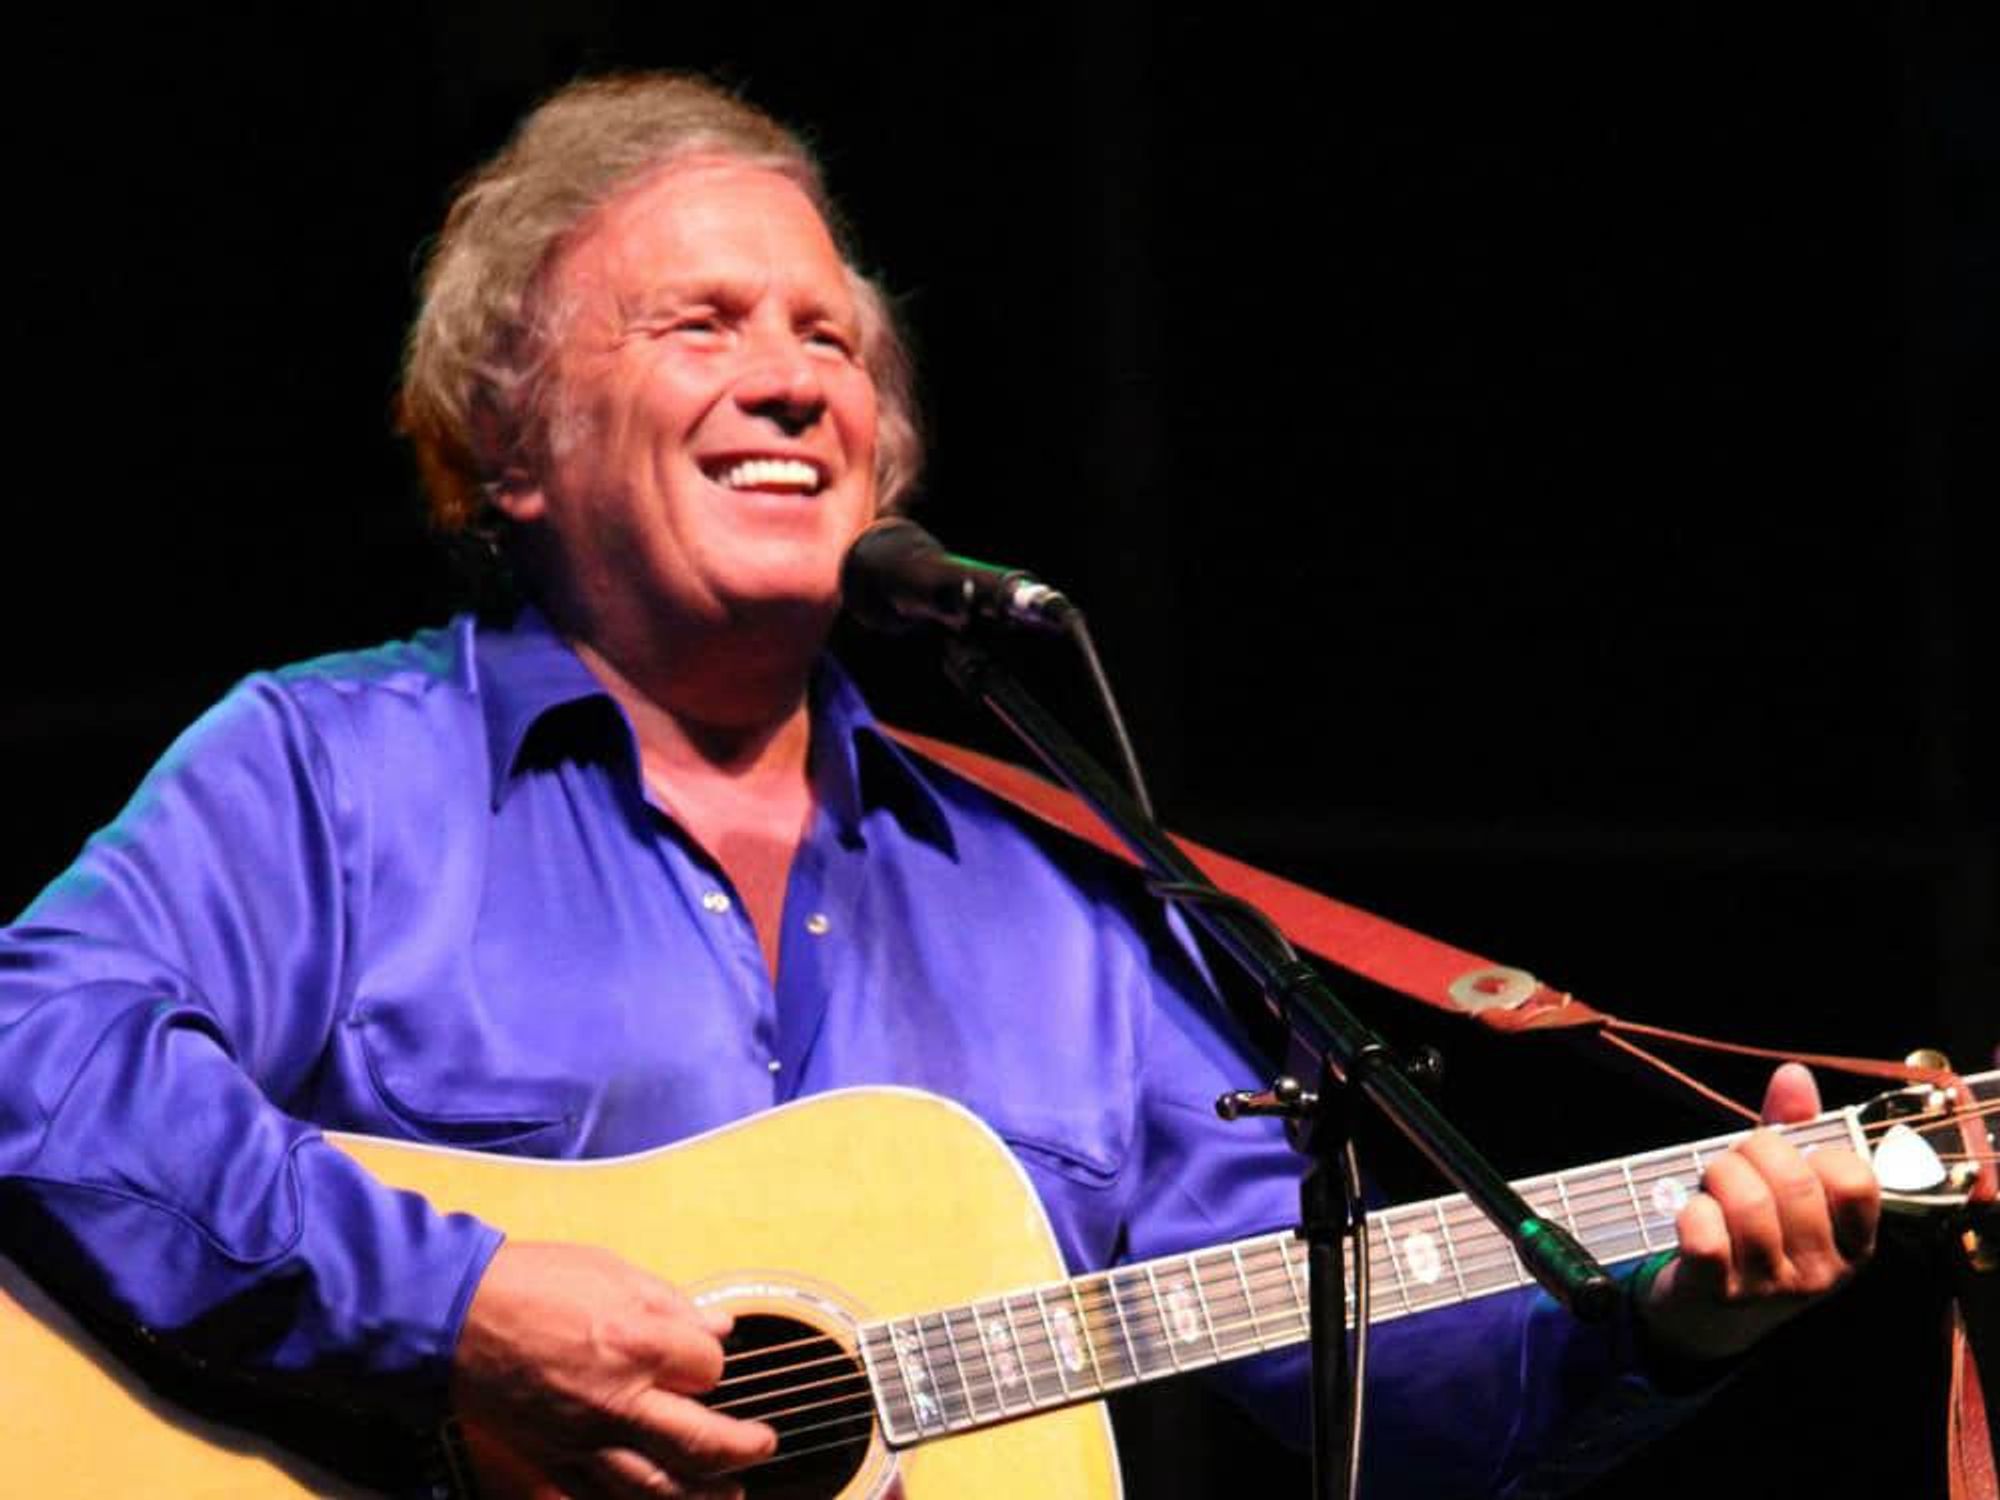 Singer-songwriter Don McLean comes San Antonio as part of his national tour this Friday.